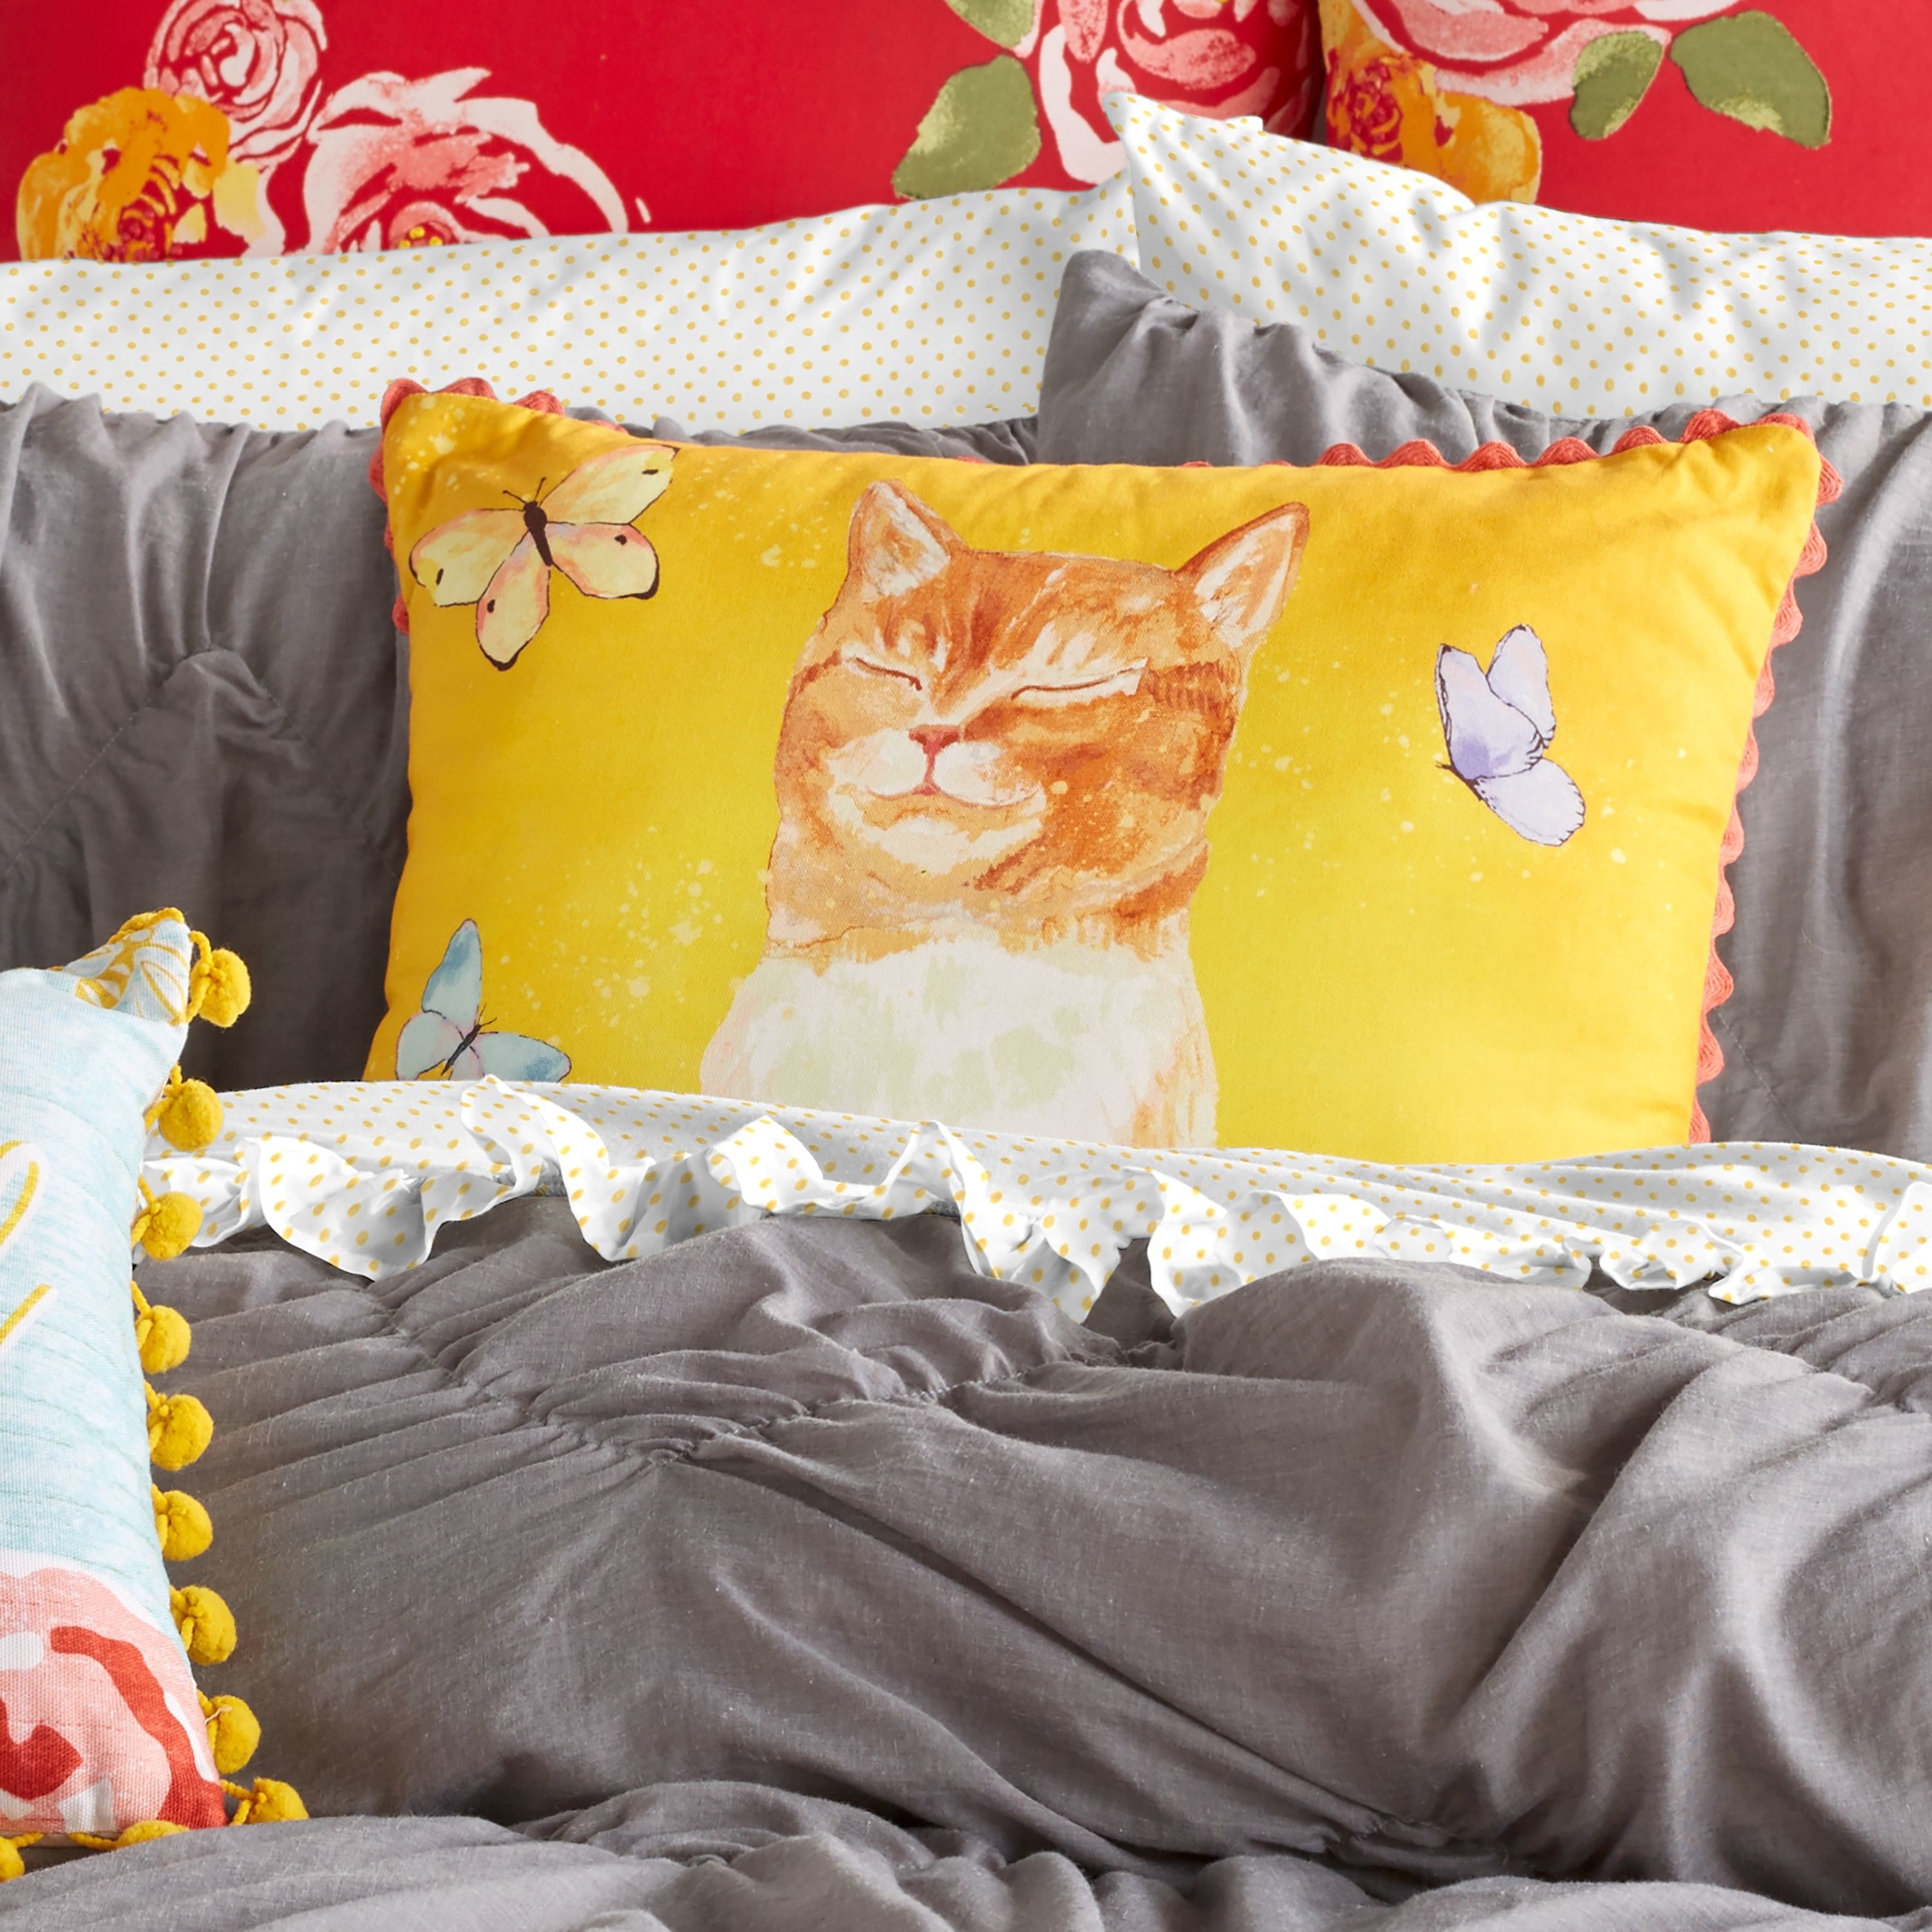 The pillow is yellow and features a cat with its eyes closed and butterflies 